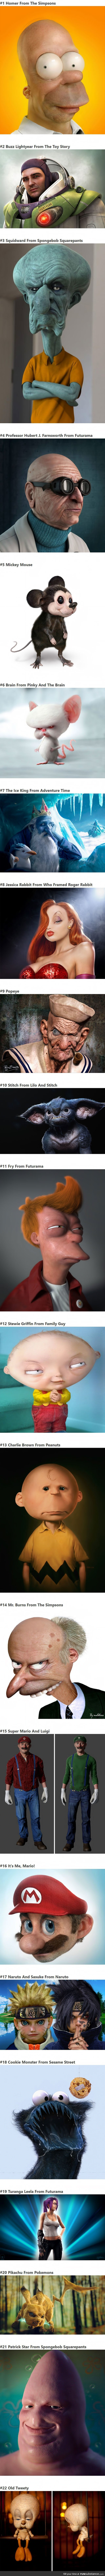 Realistic Cartoon Characters in 3D Look Creepy As Hell